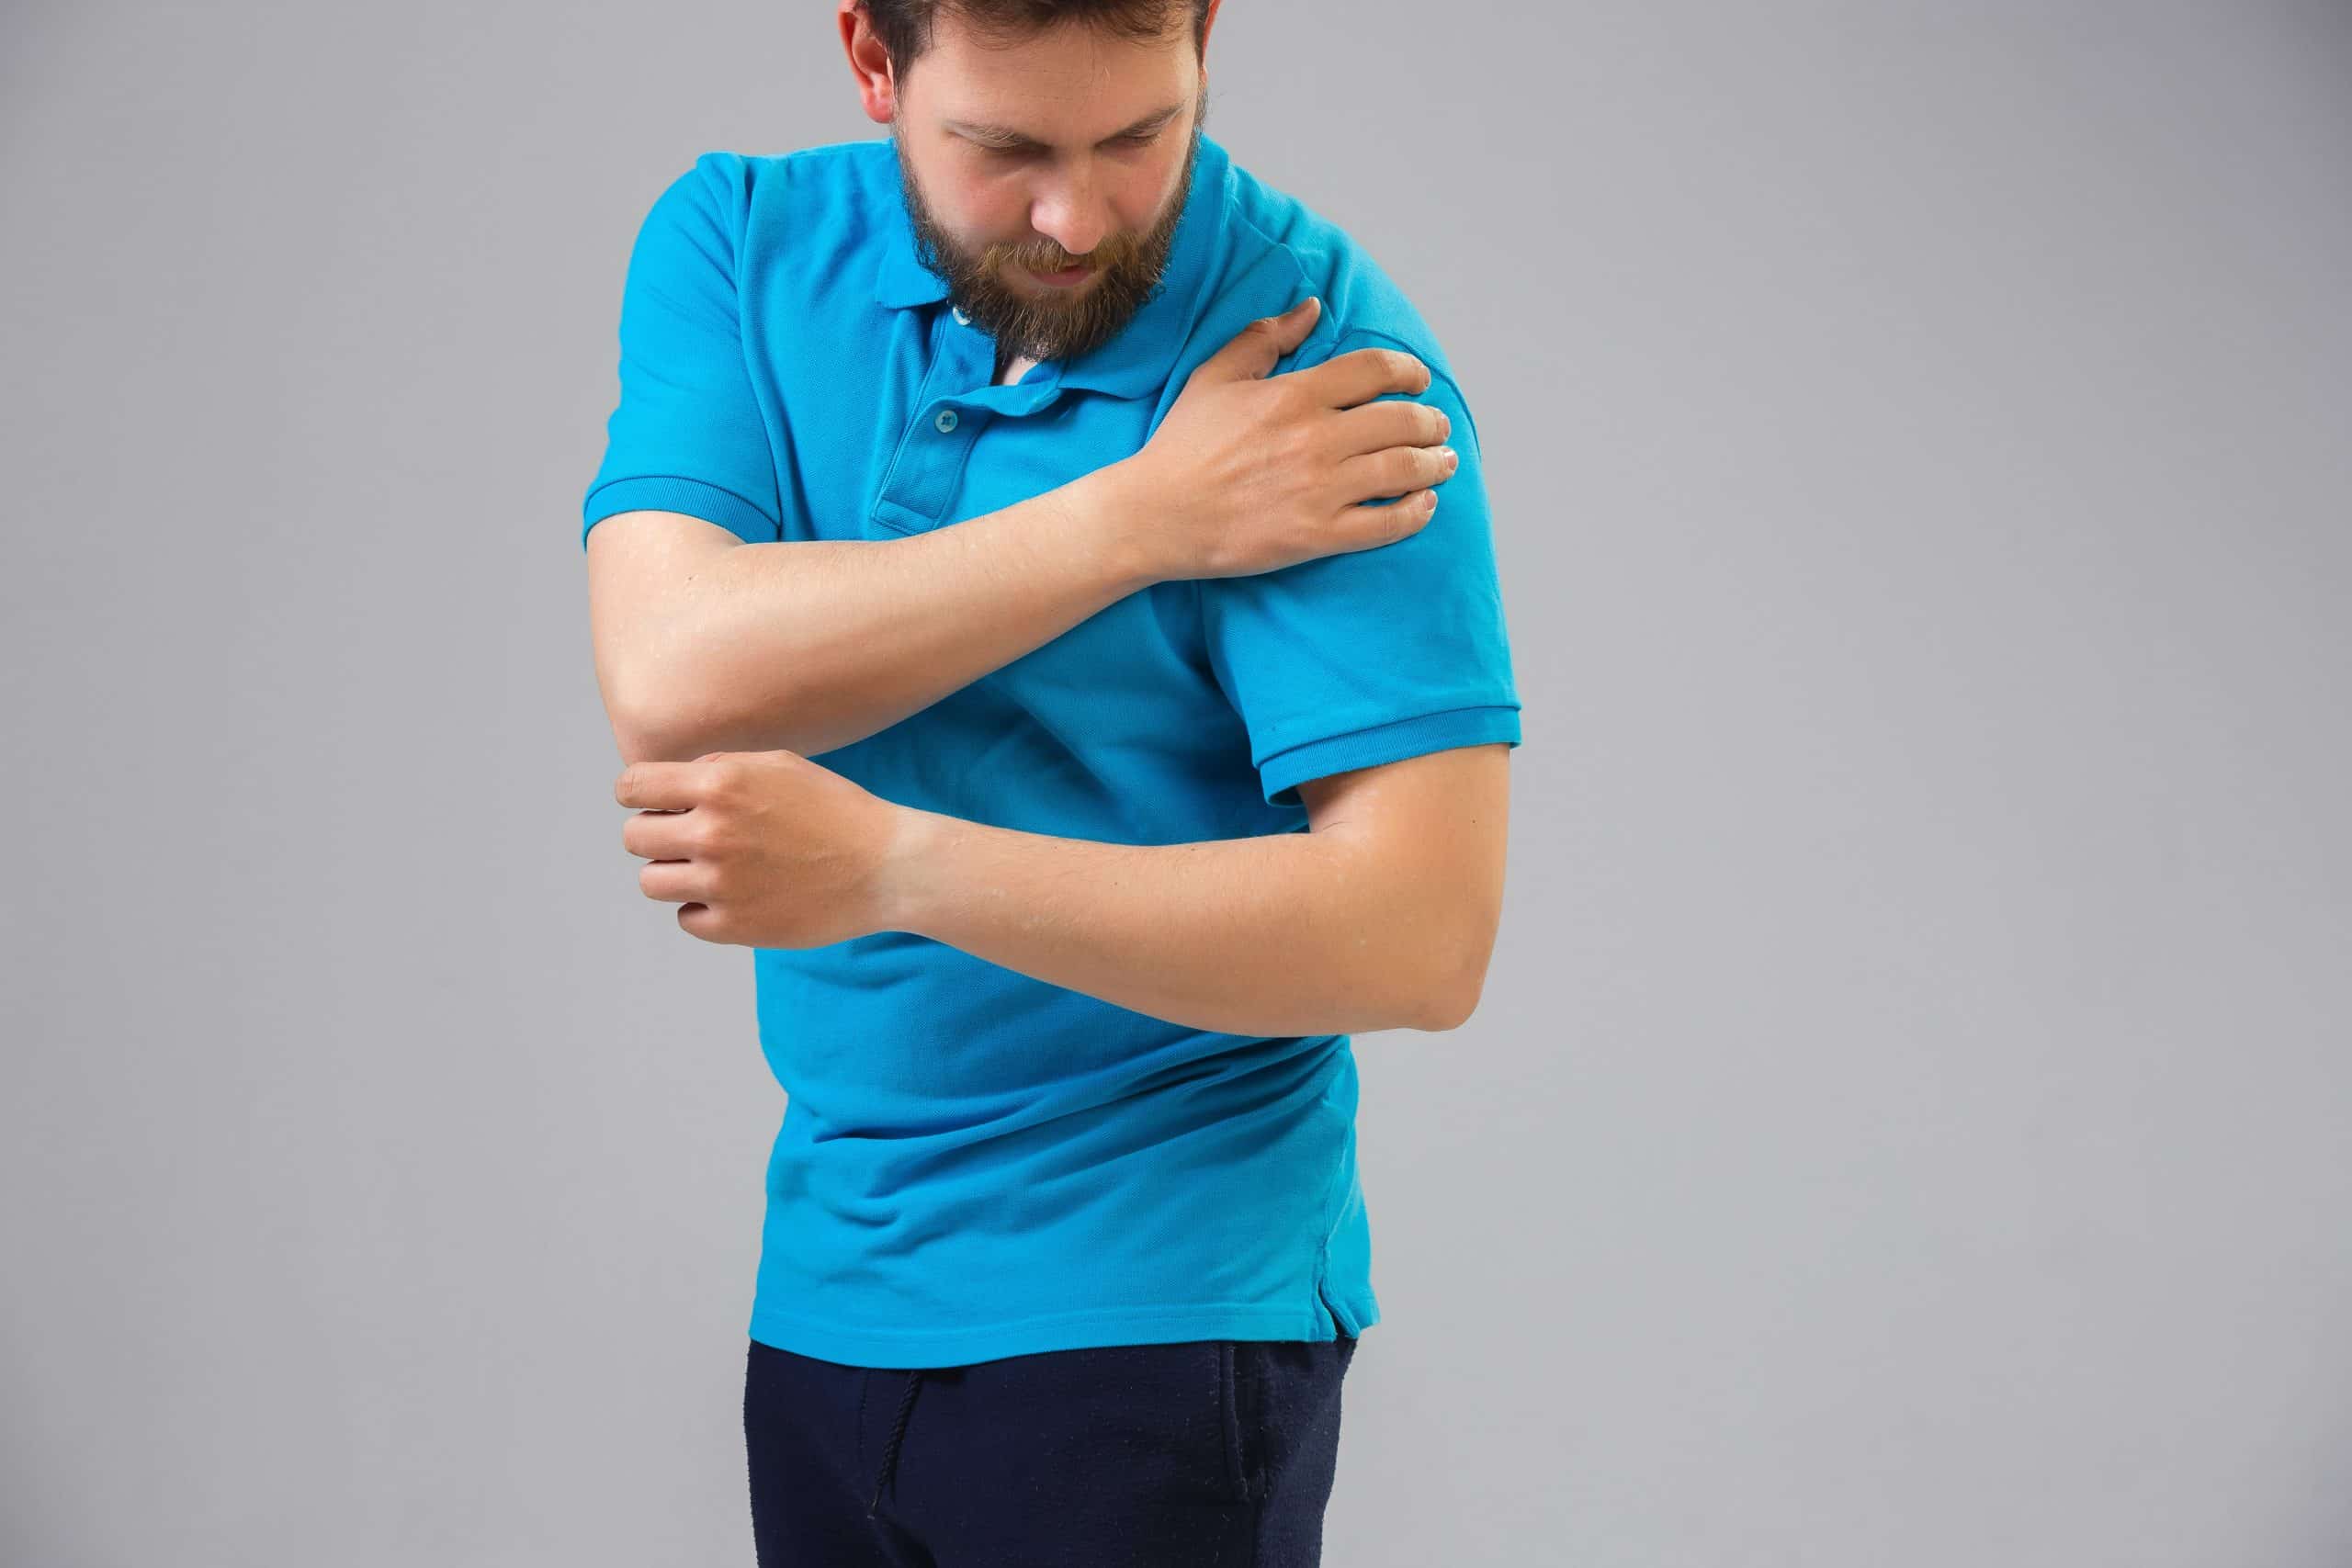 Know About Rotator Cuff Injuries